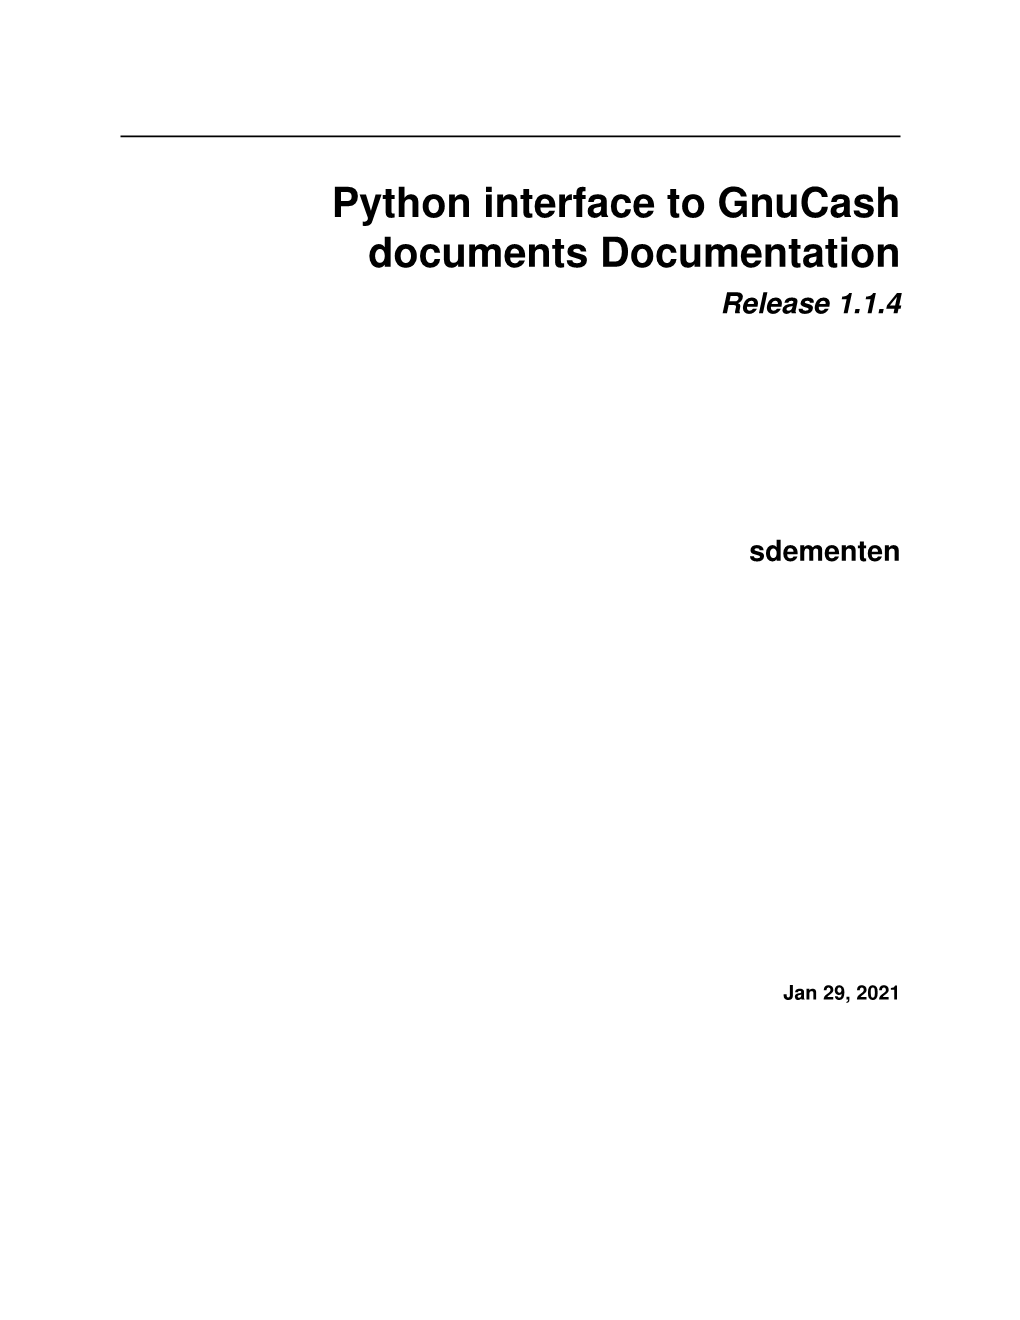 Python Interface to Gnucash Documents Documentation Release 1.1.4